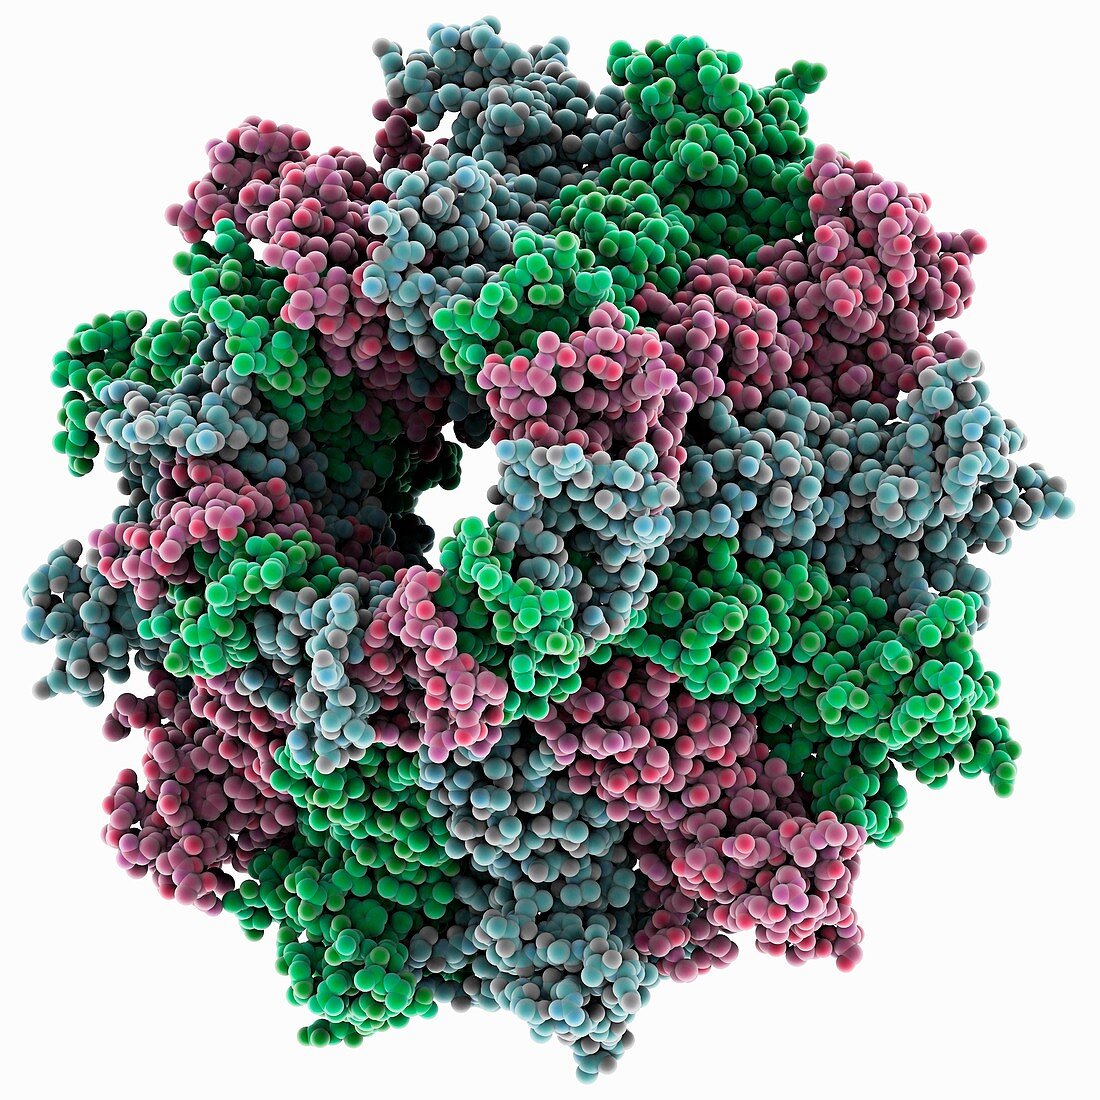 Bacteriophage portal protein